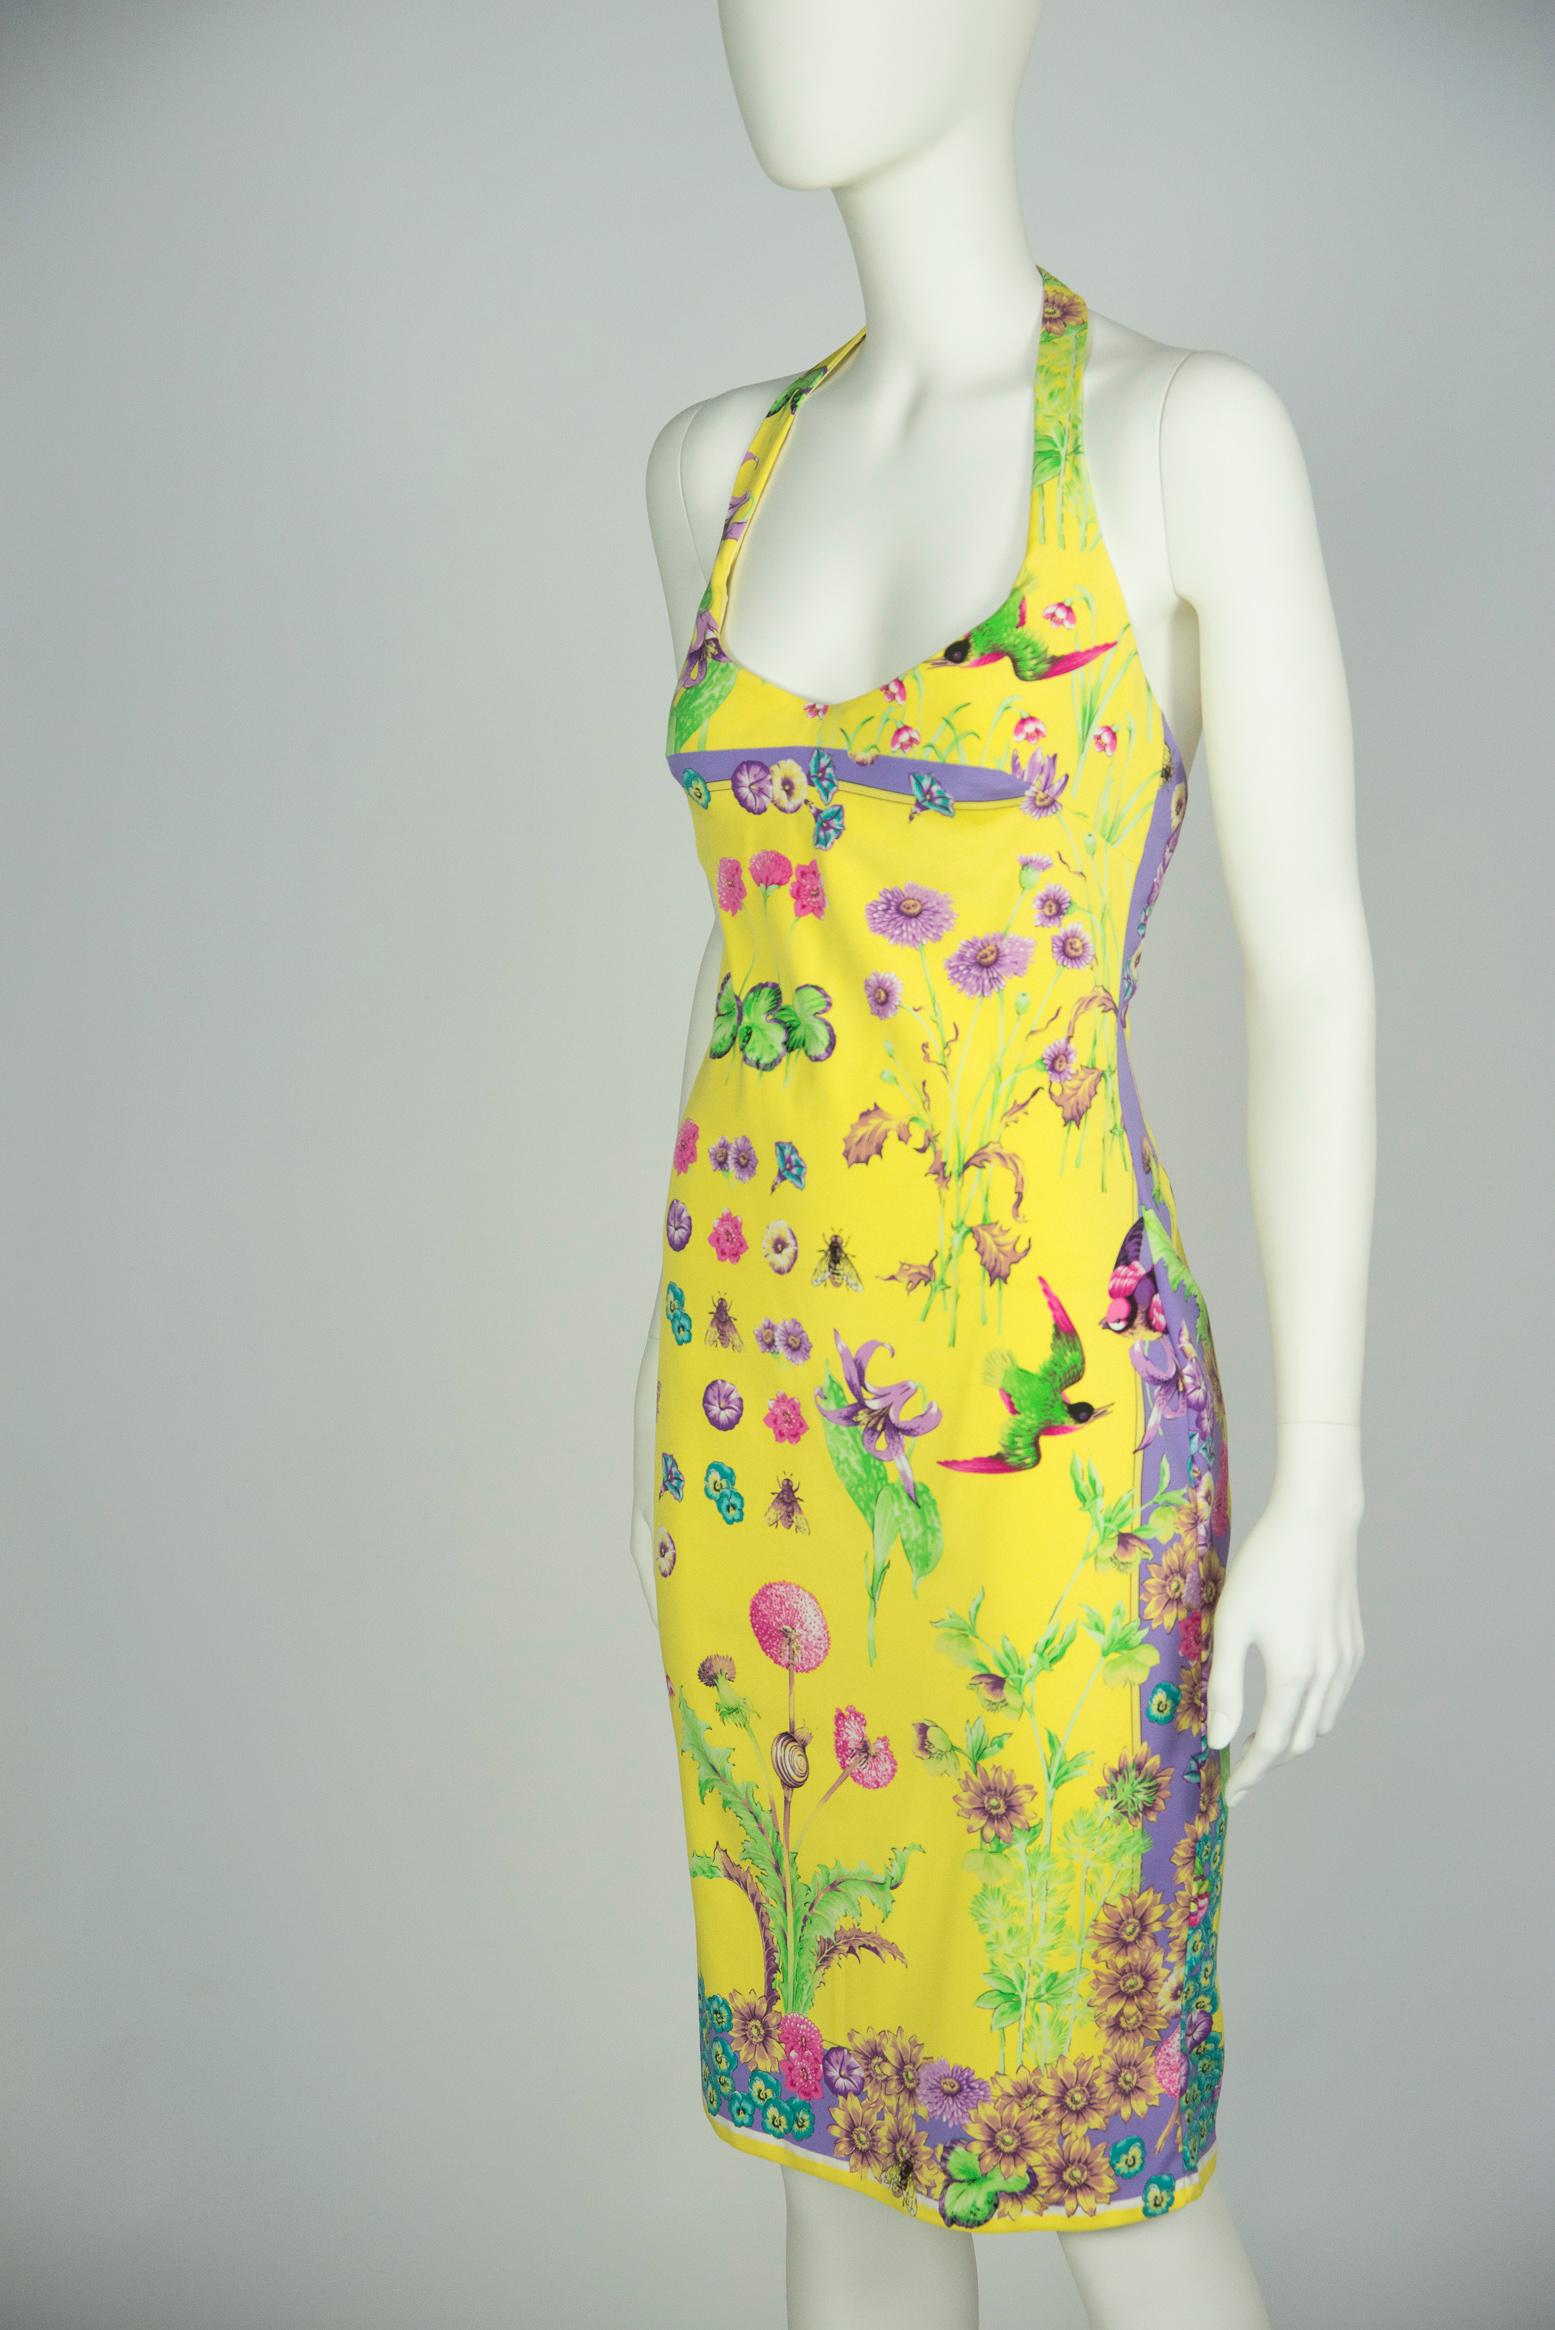 Gianni Versace Couture Printed Halterneck Dress, Circa 1995-1996 For Sale 2